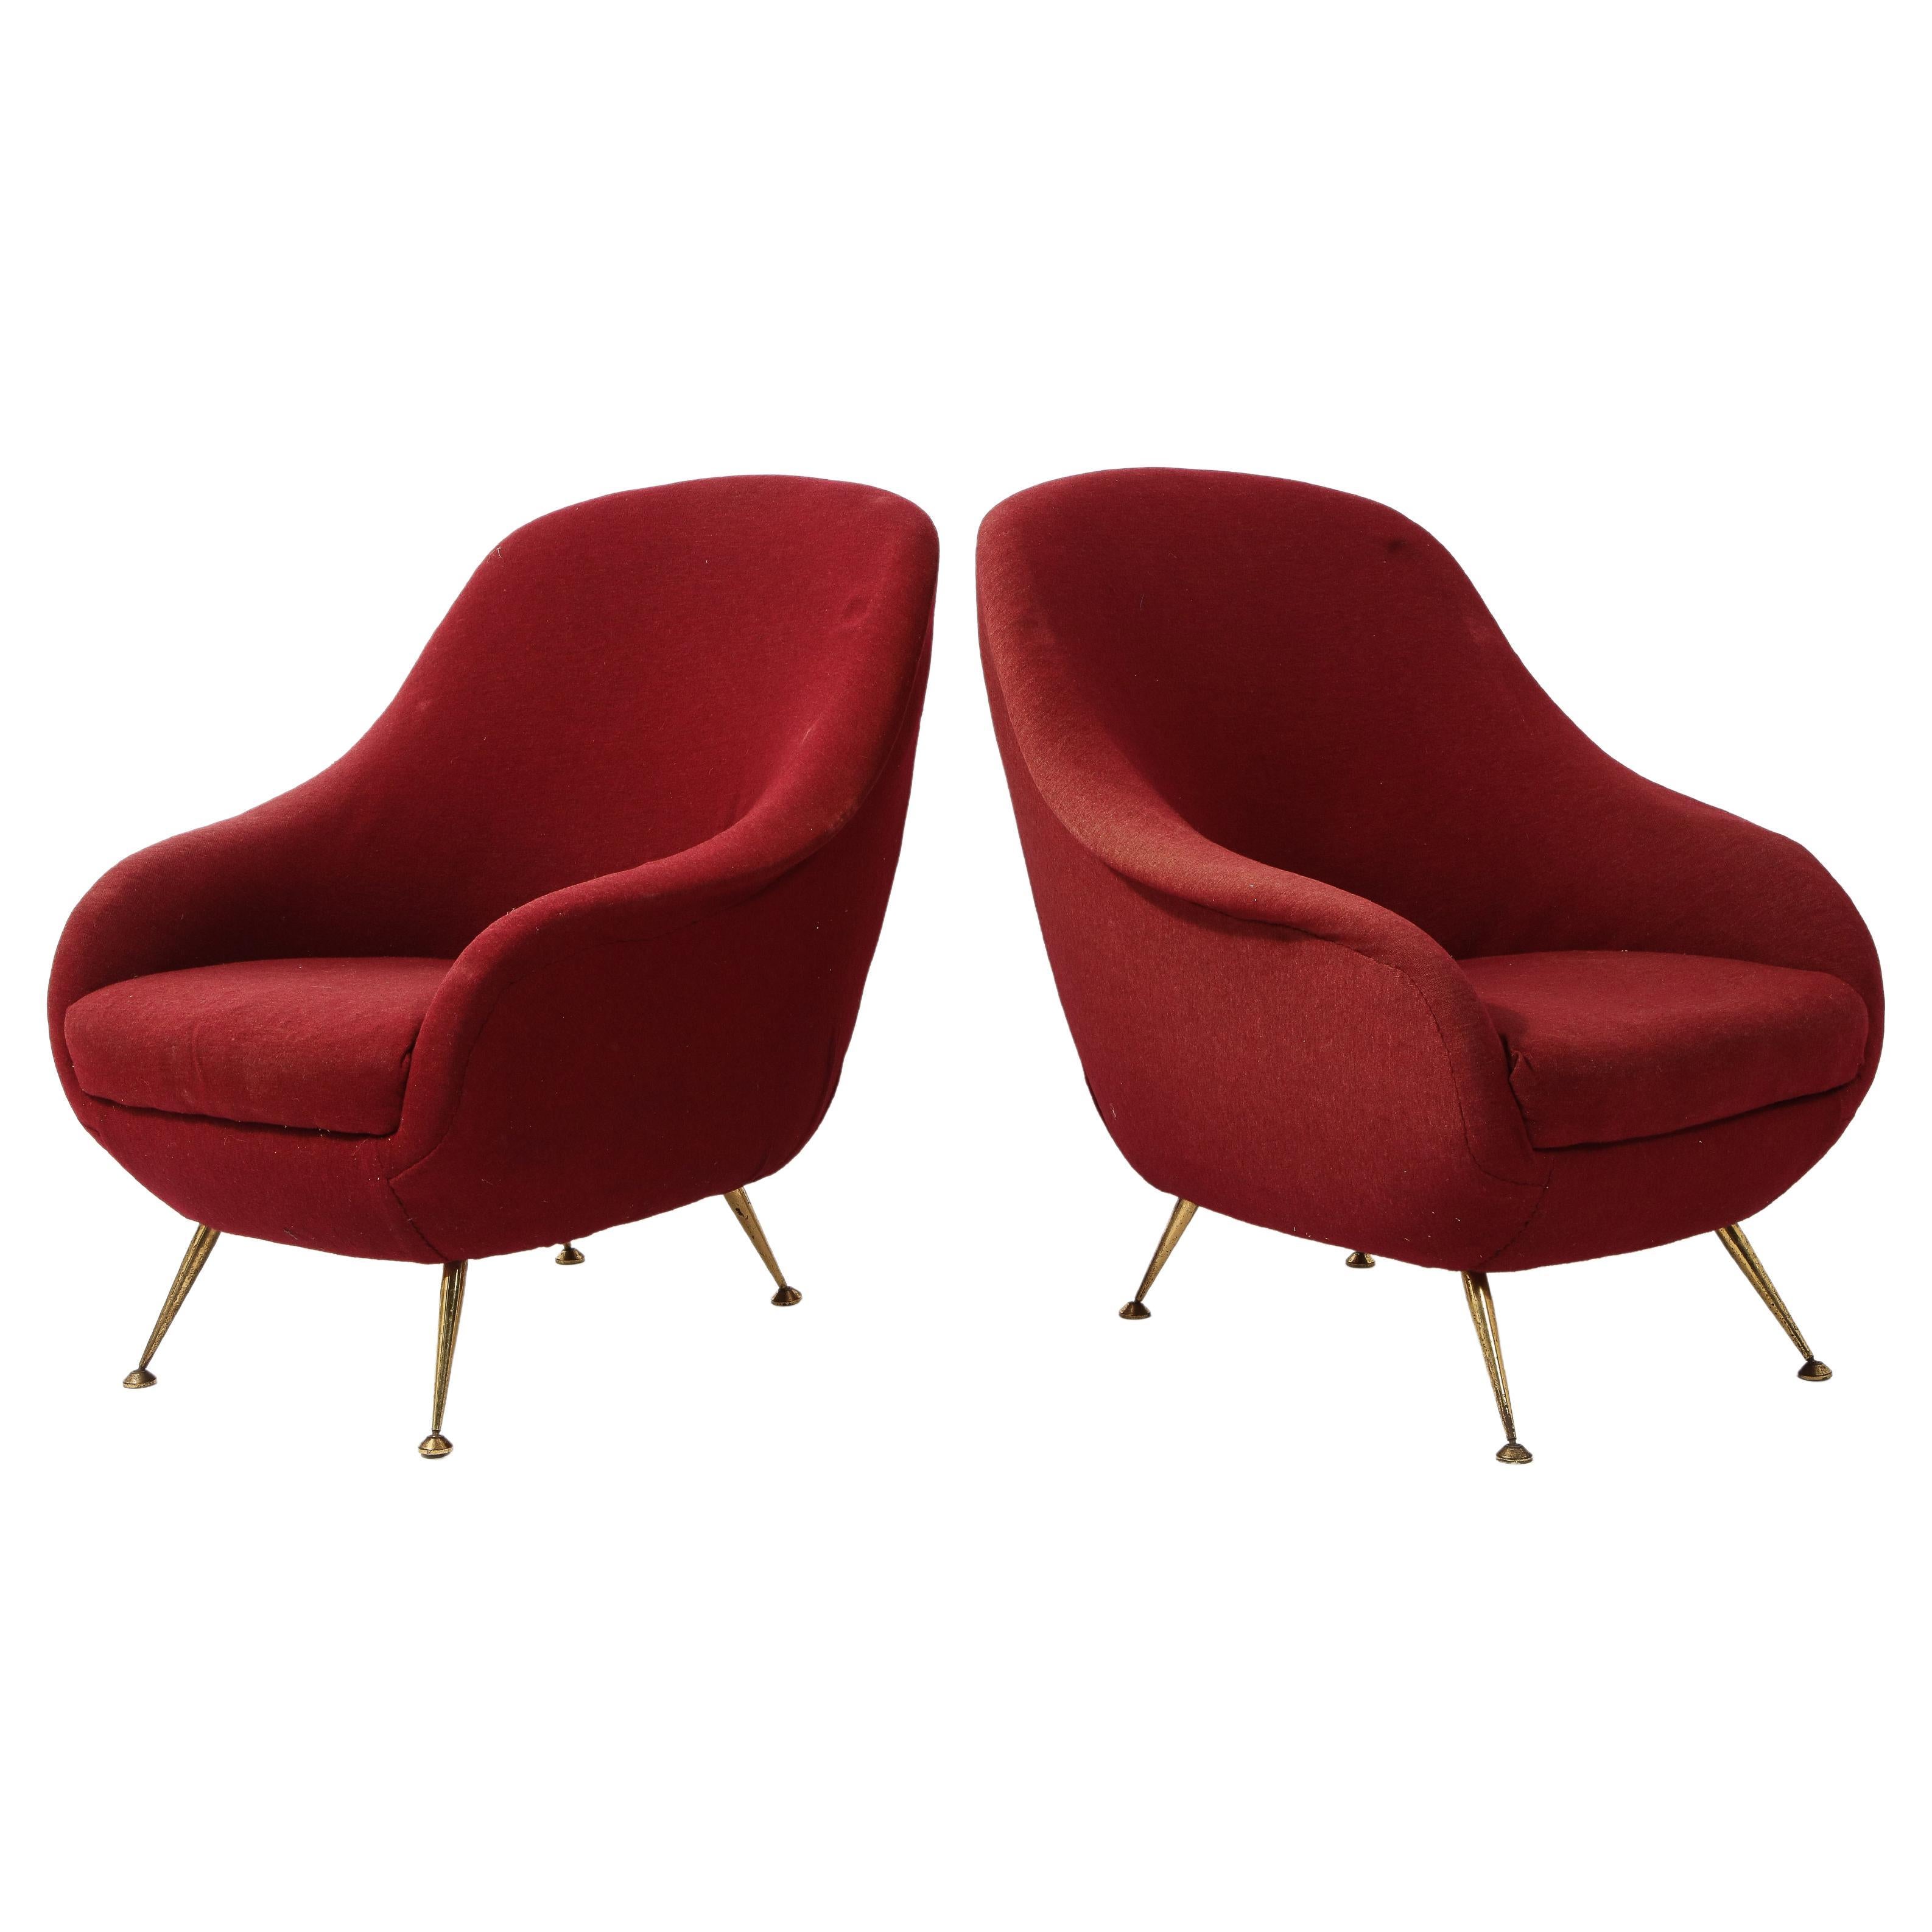 Pair of Burgundy "Egg" Lounge Chairs, Italy 1950's